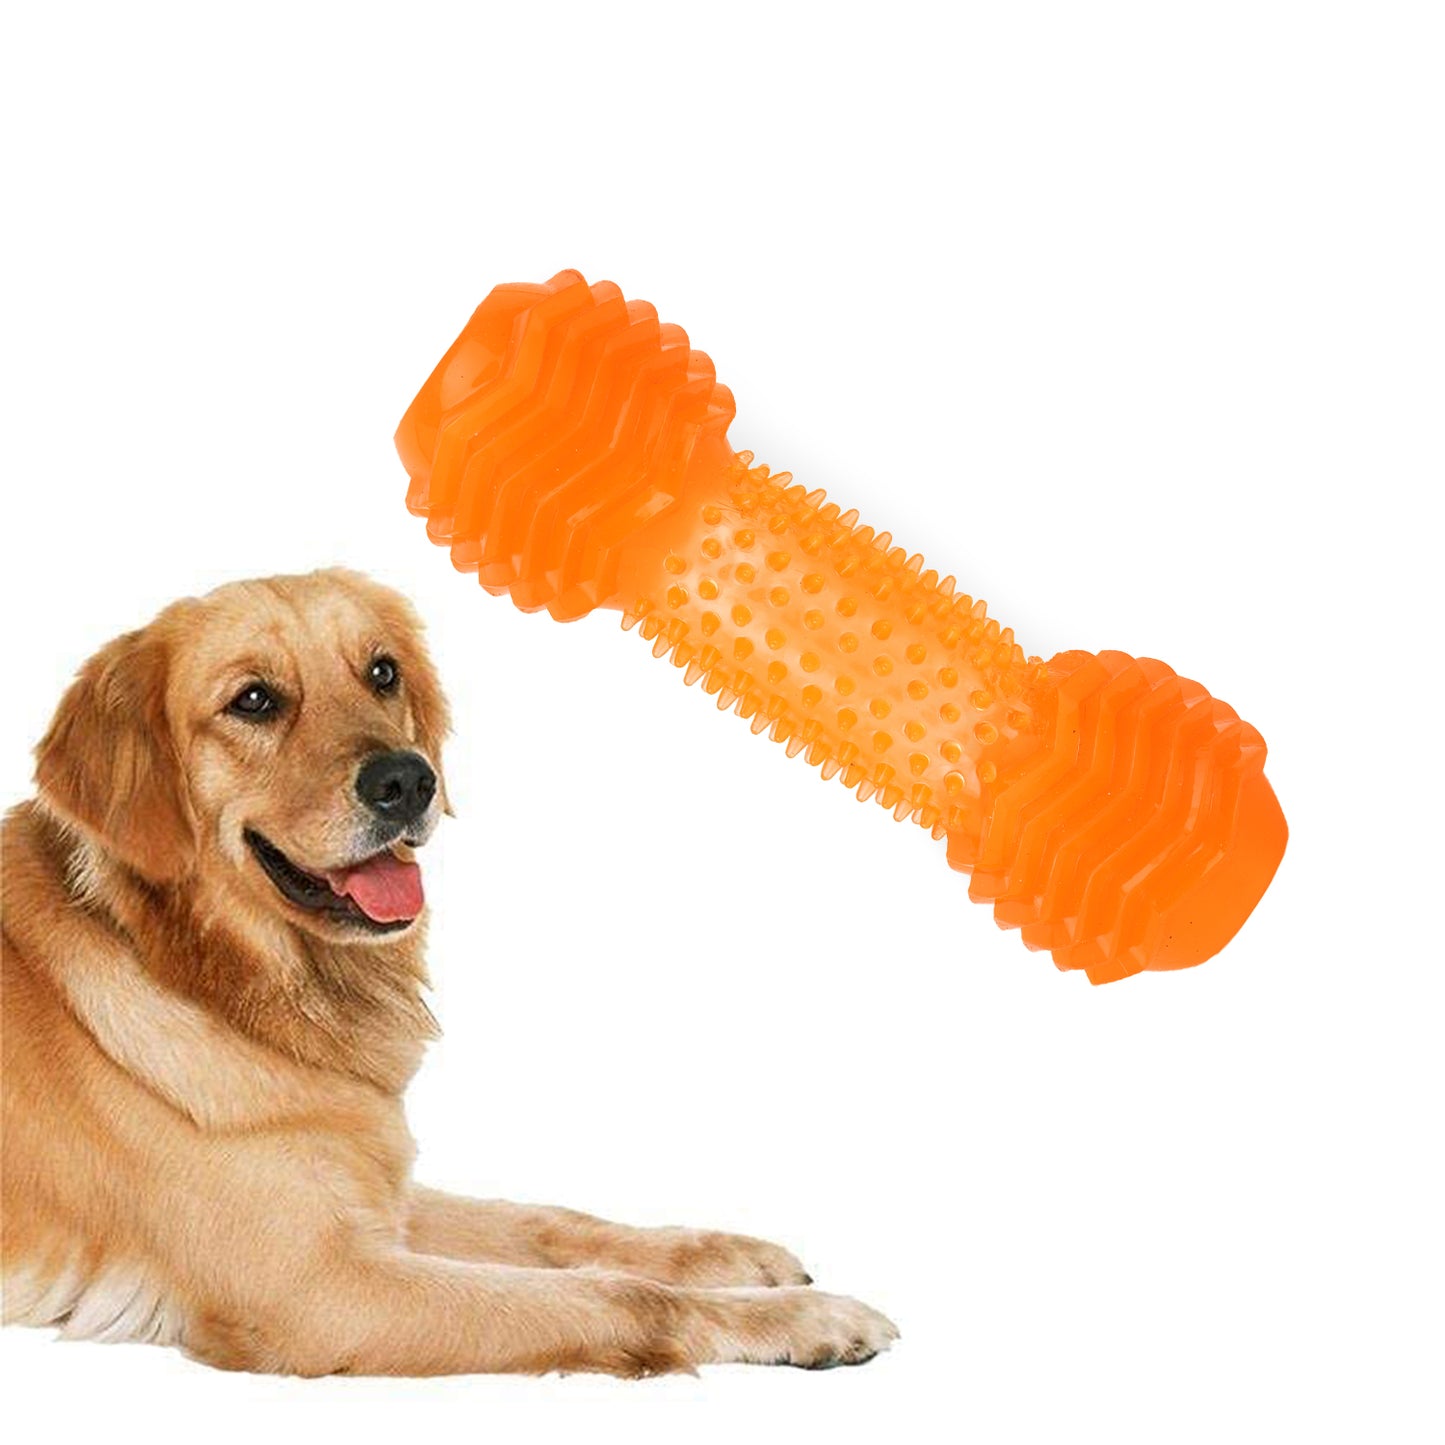 BASIL Dumbbell Toy with Hollow Centre for Treats